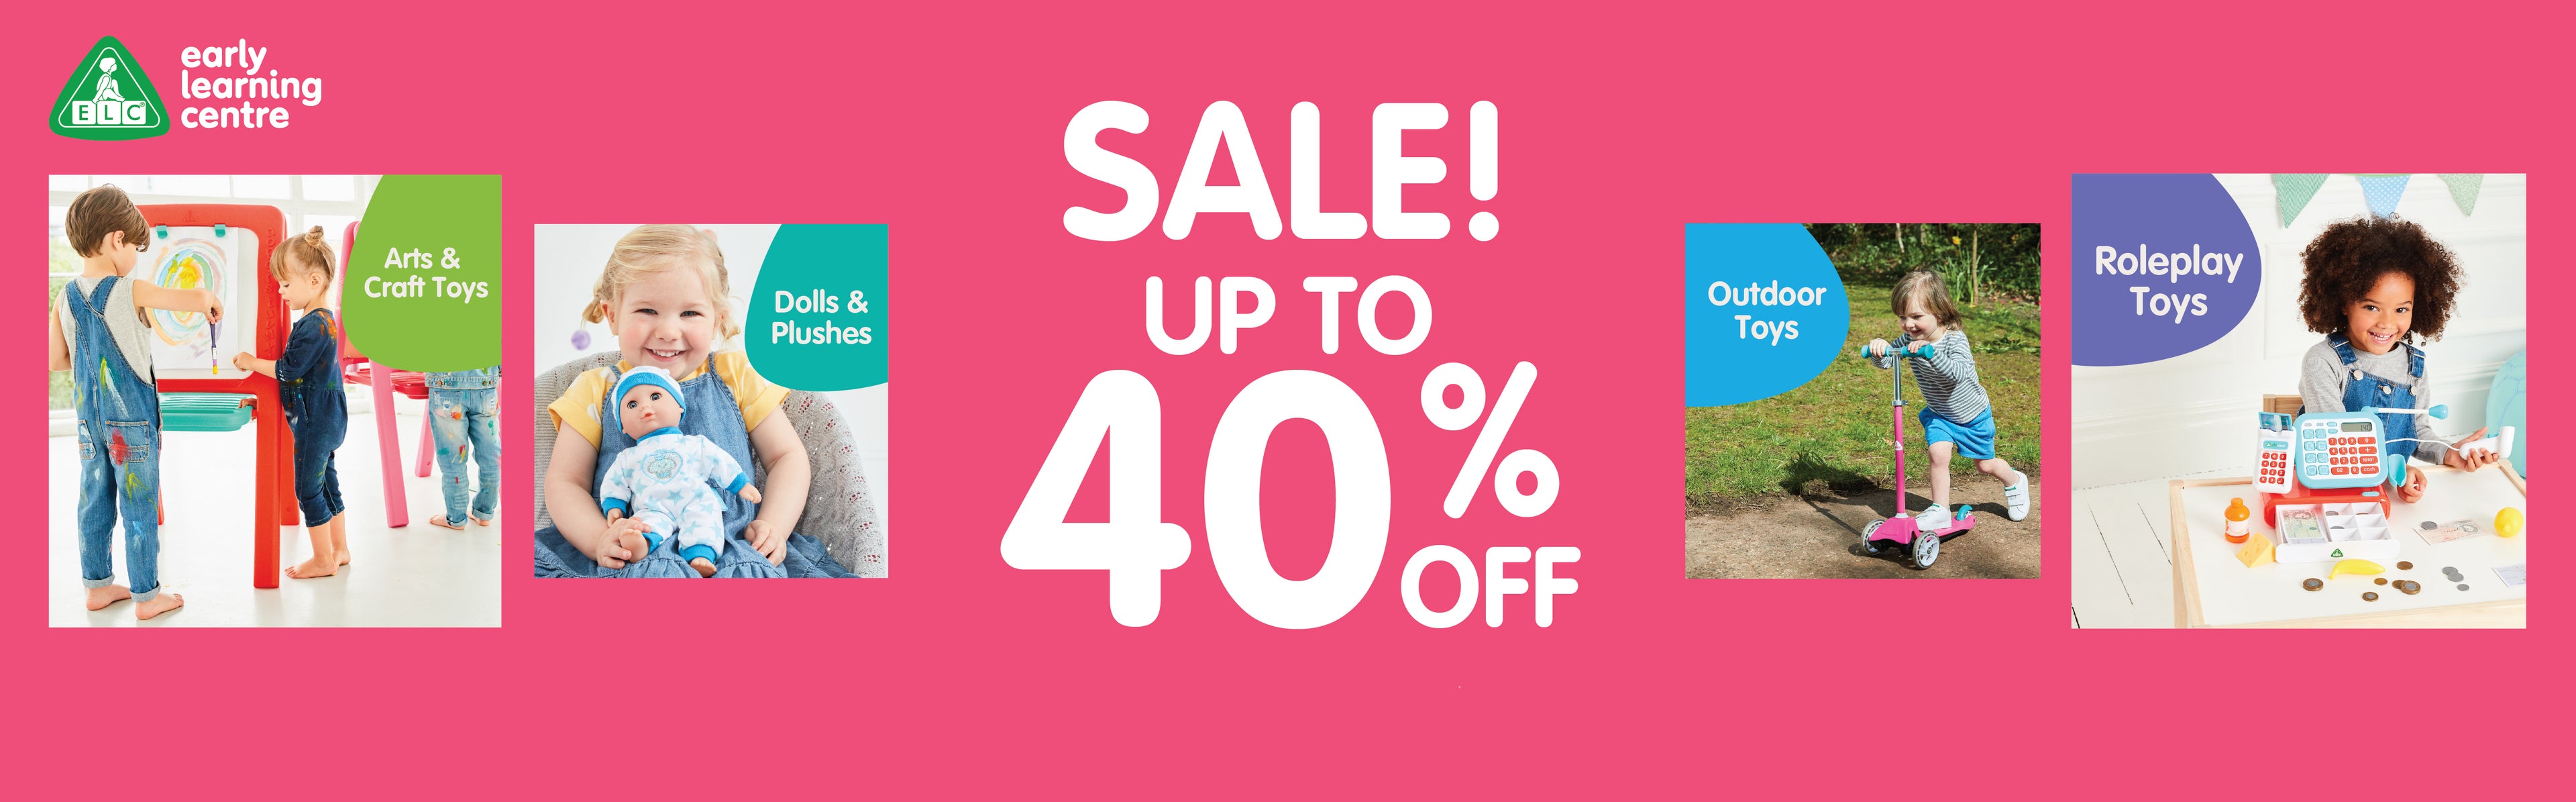 Ealry Learning Sale upto 40% OFF by The Entertainer